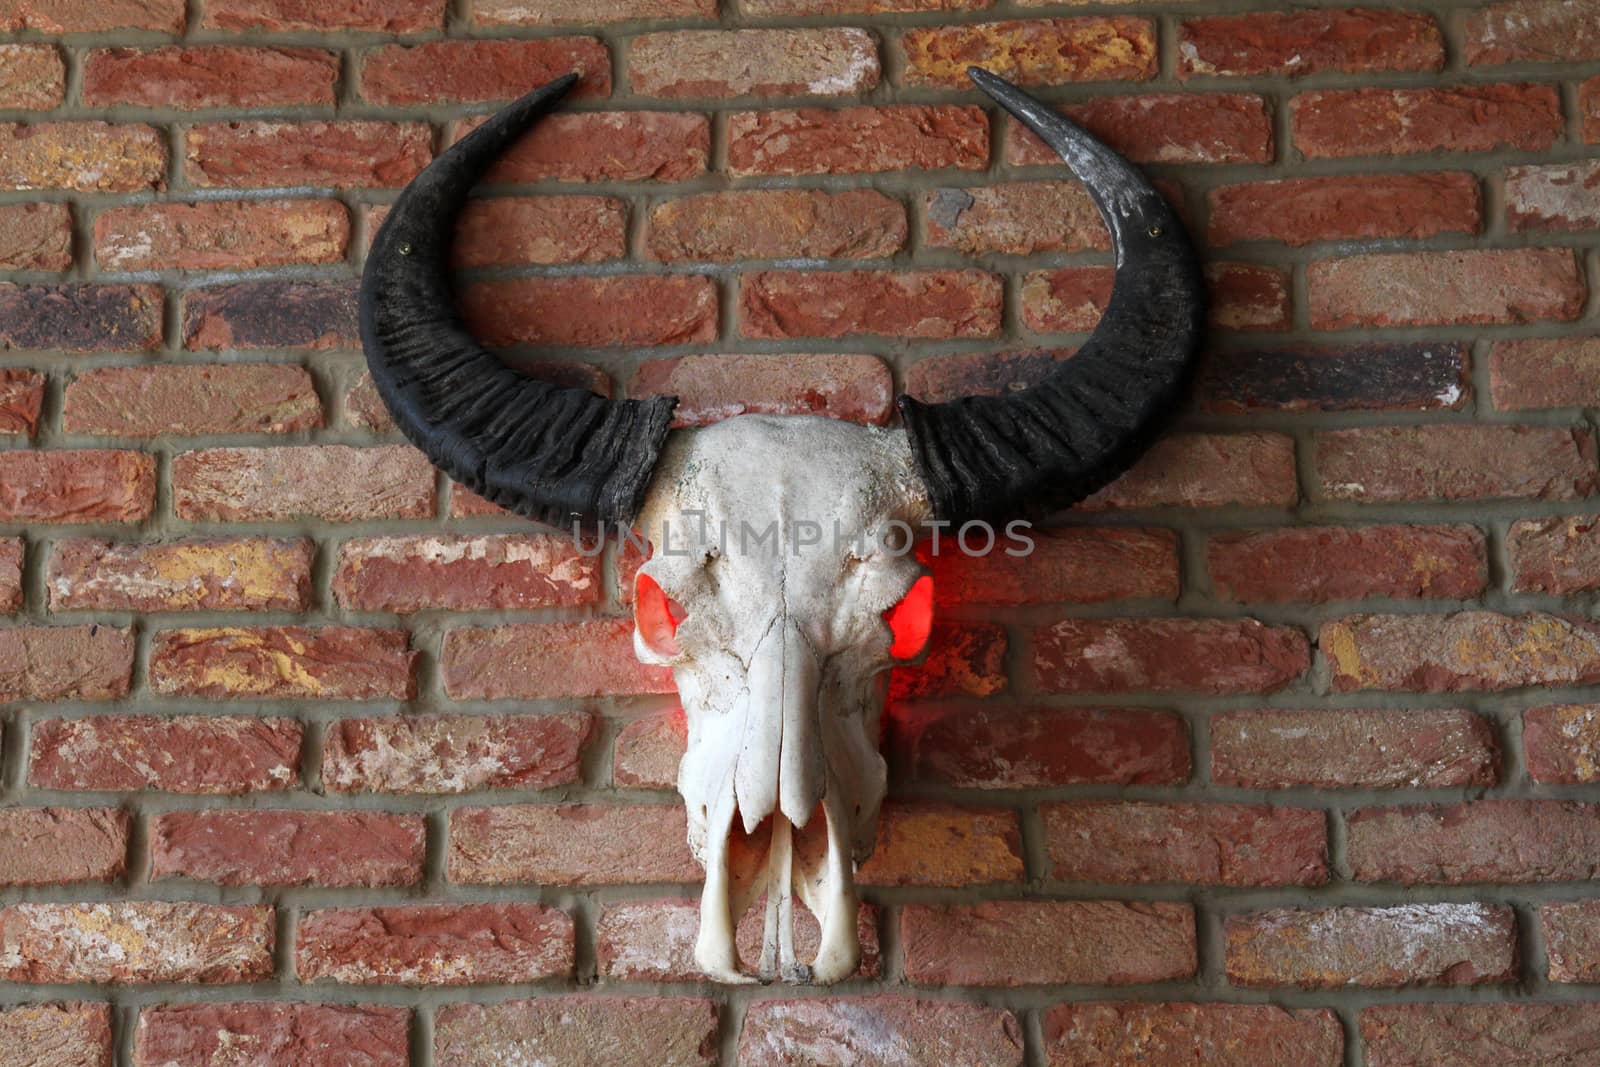 A decorative animal skull with horns and red glowing eyes